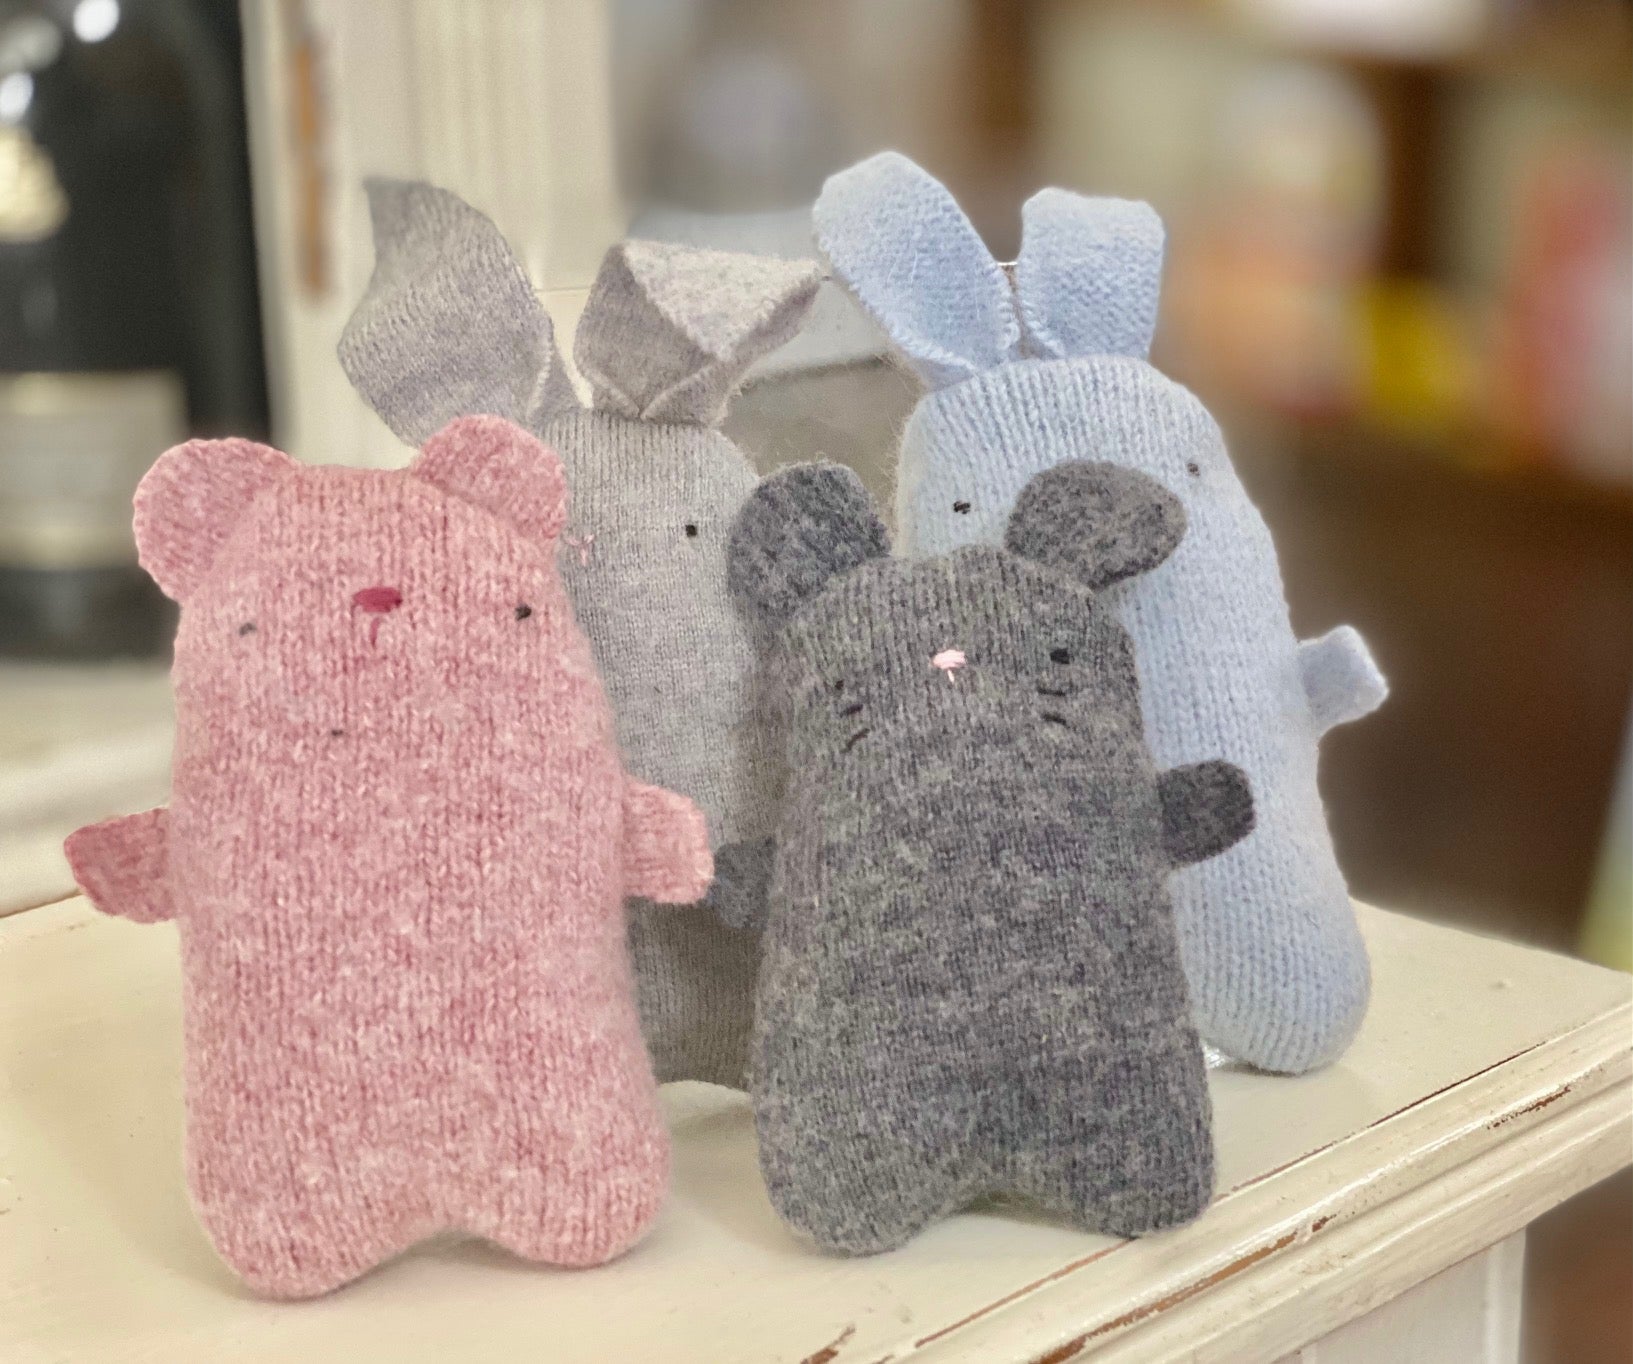 Hand Stitched Bunnies and Mice